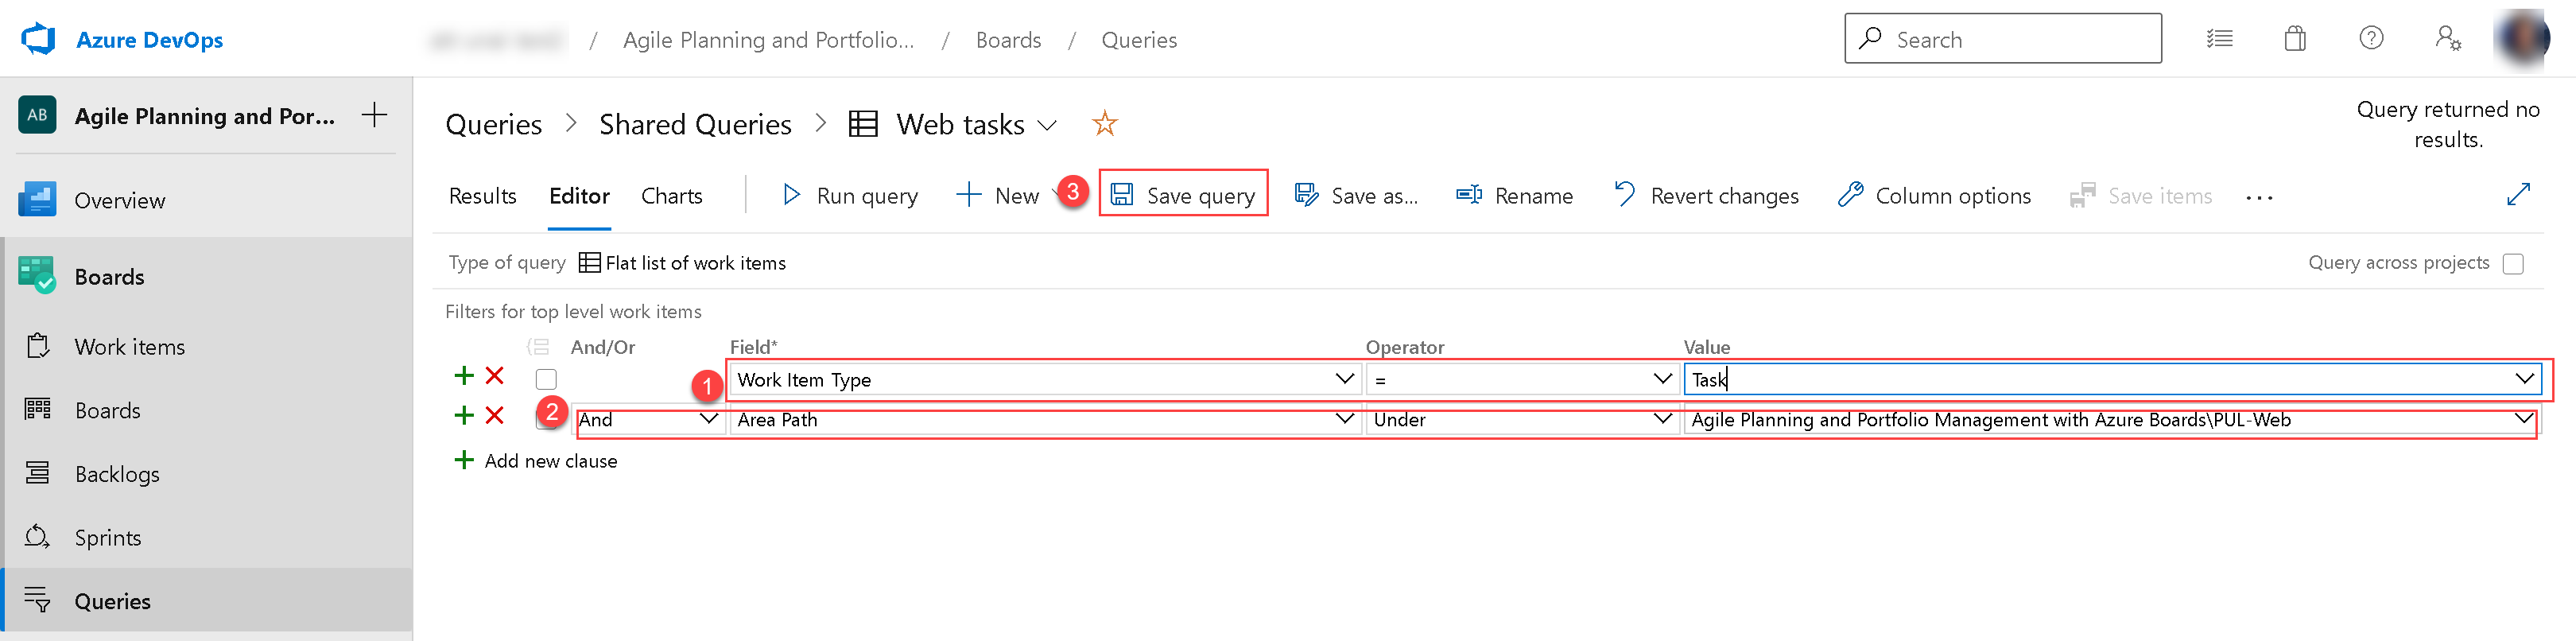 On the "Editor" tab of "Queries > My Queries" pane, in the second row, in
the "Field" column, select "Area Path" and, in the corresponding "Value"
dropdown list, select "Agile Planning and Portfolio Management with Azure Boards\PUL-Web"